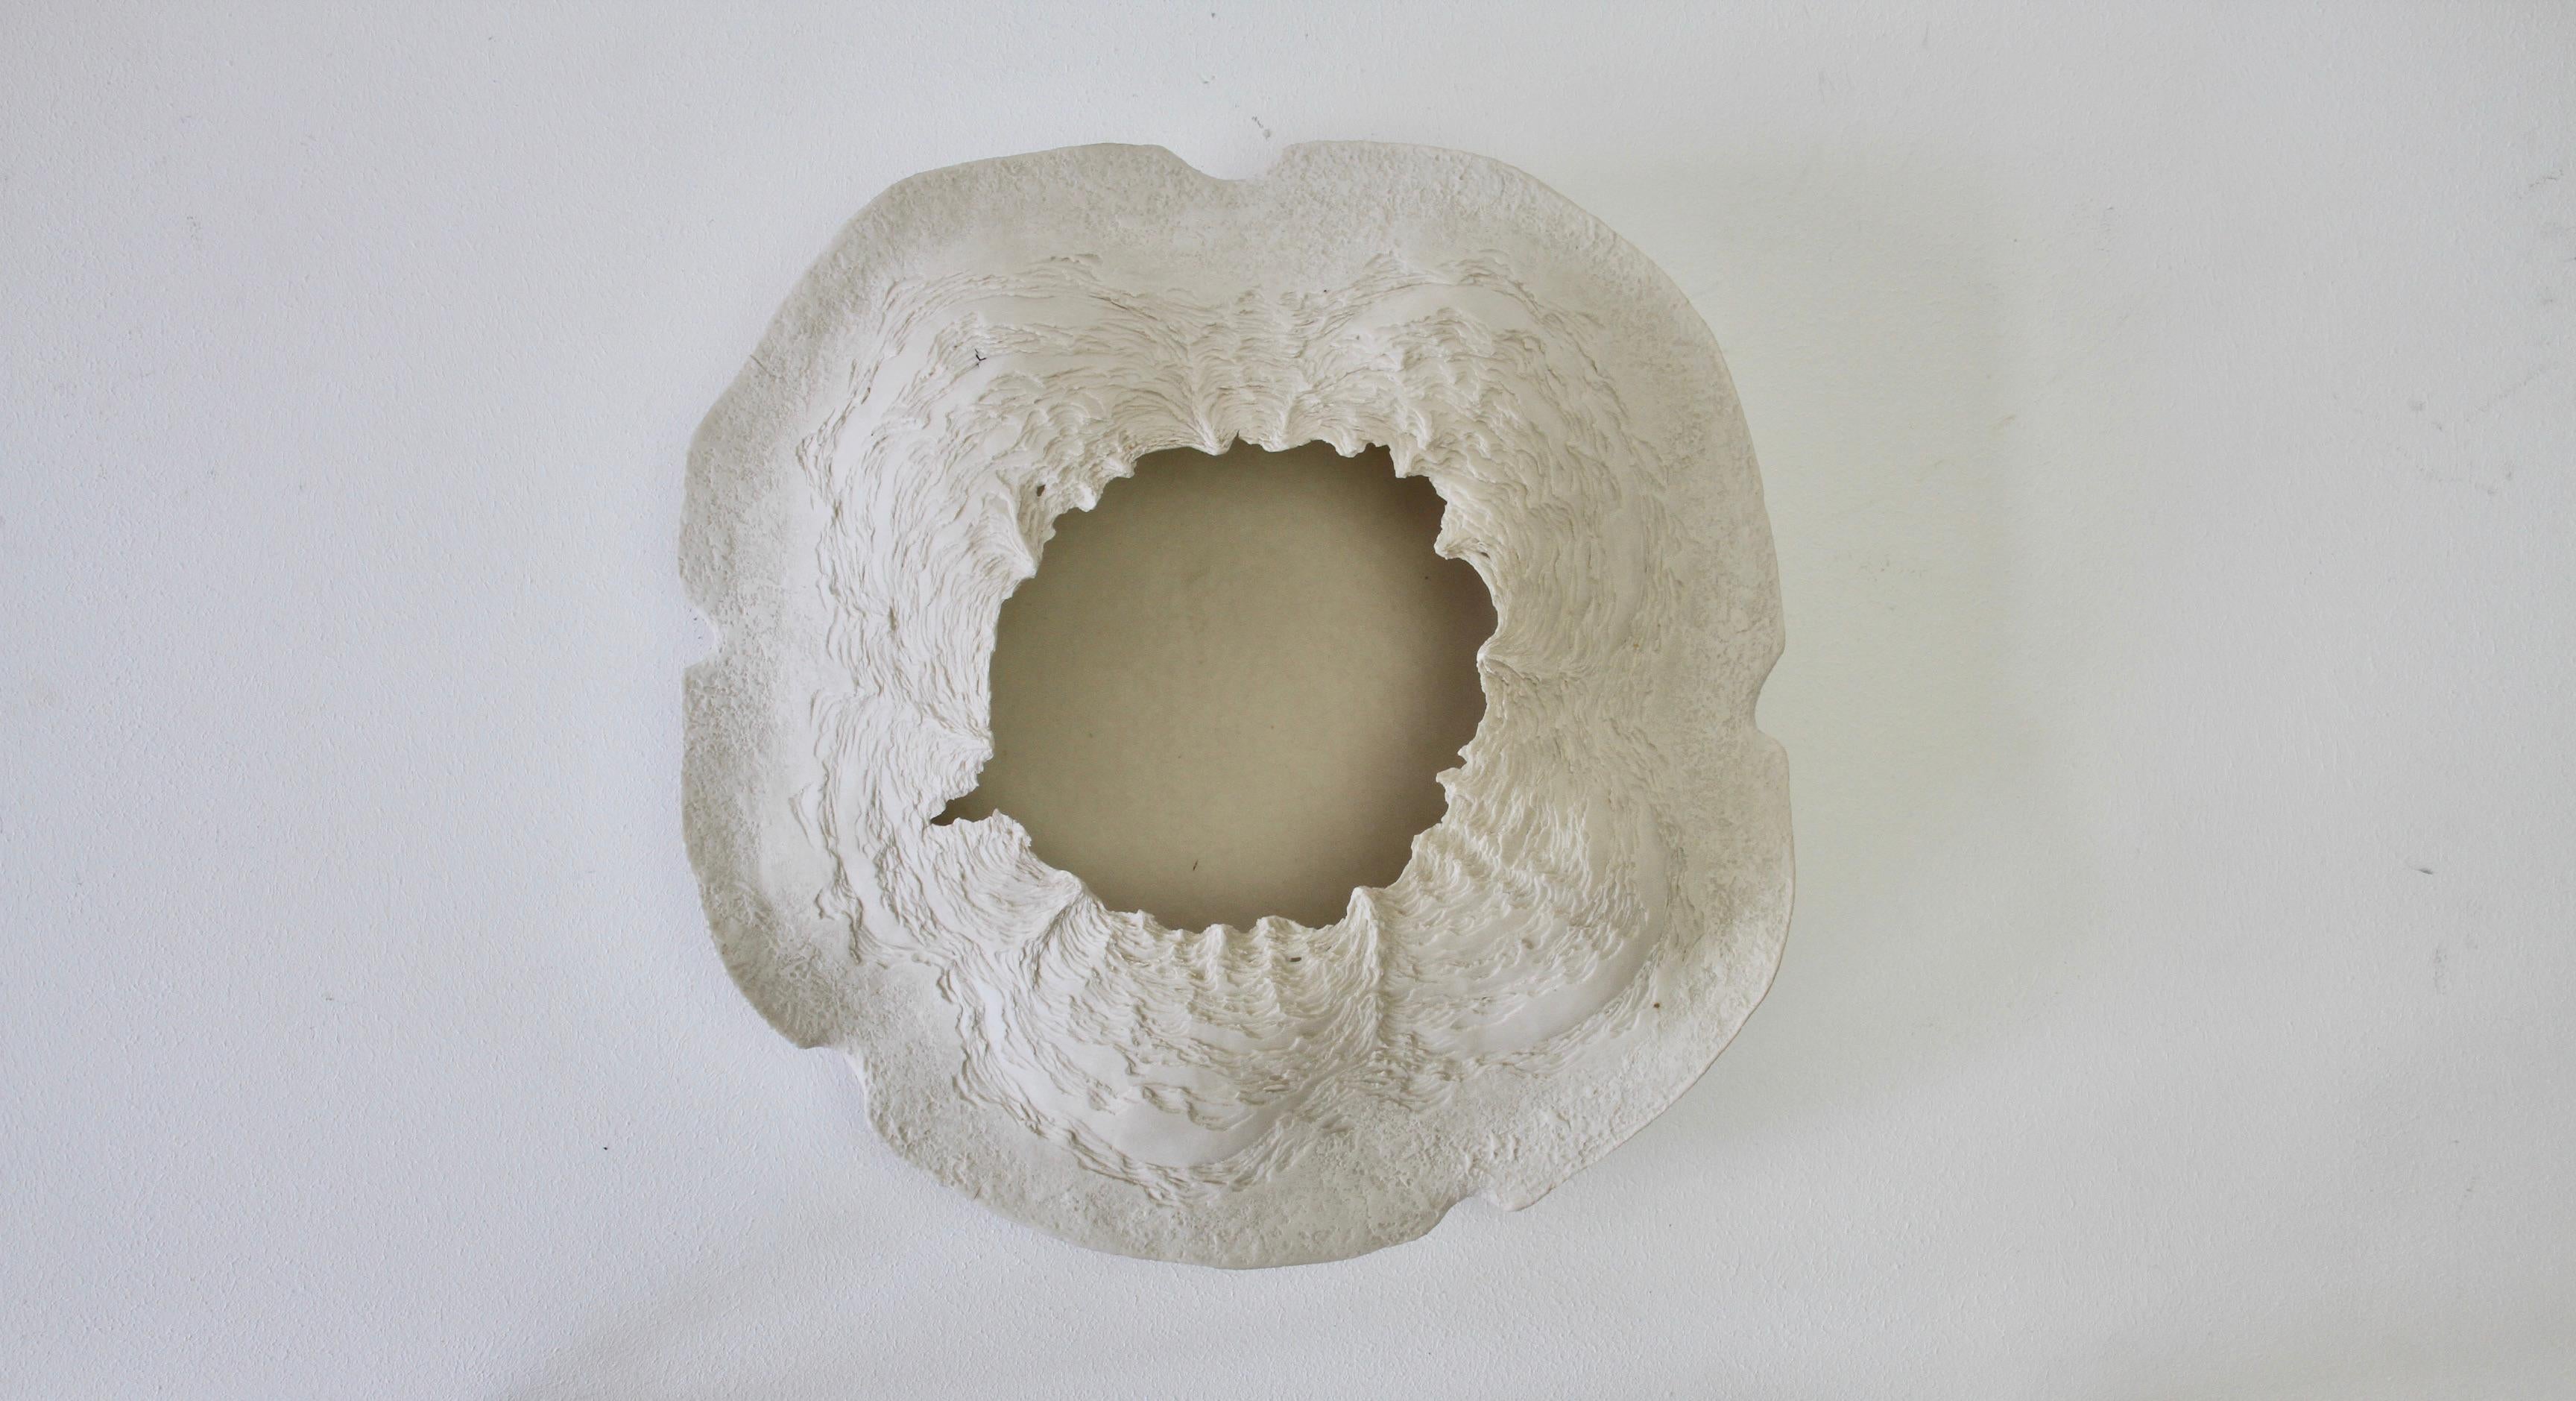 Organic Modern Maggie Barnes Carved White Organic Art Pottery Sculpture Bowl or Dish circa 1987 For Sale